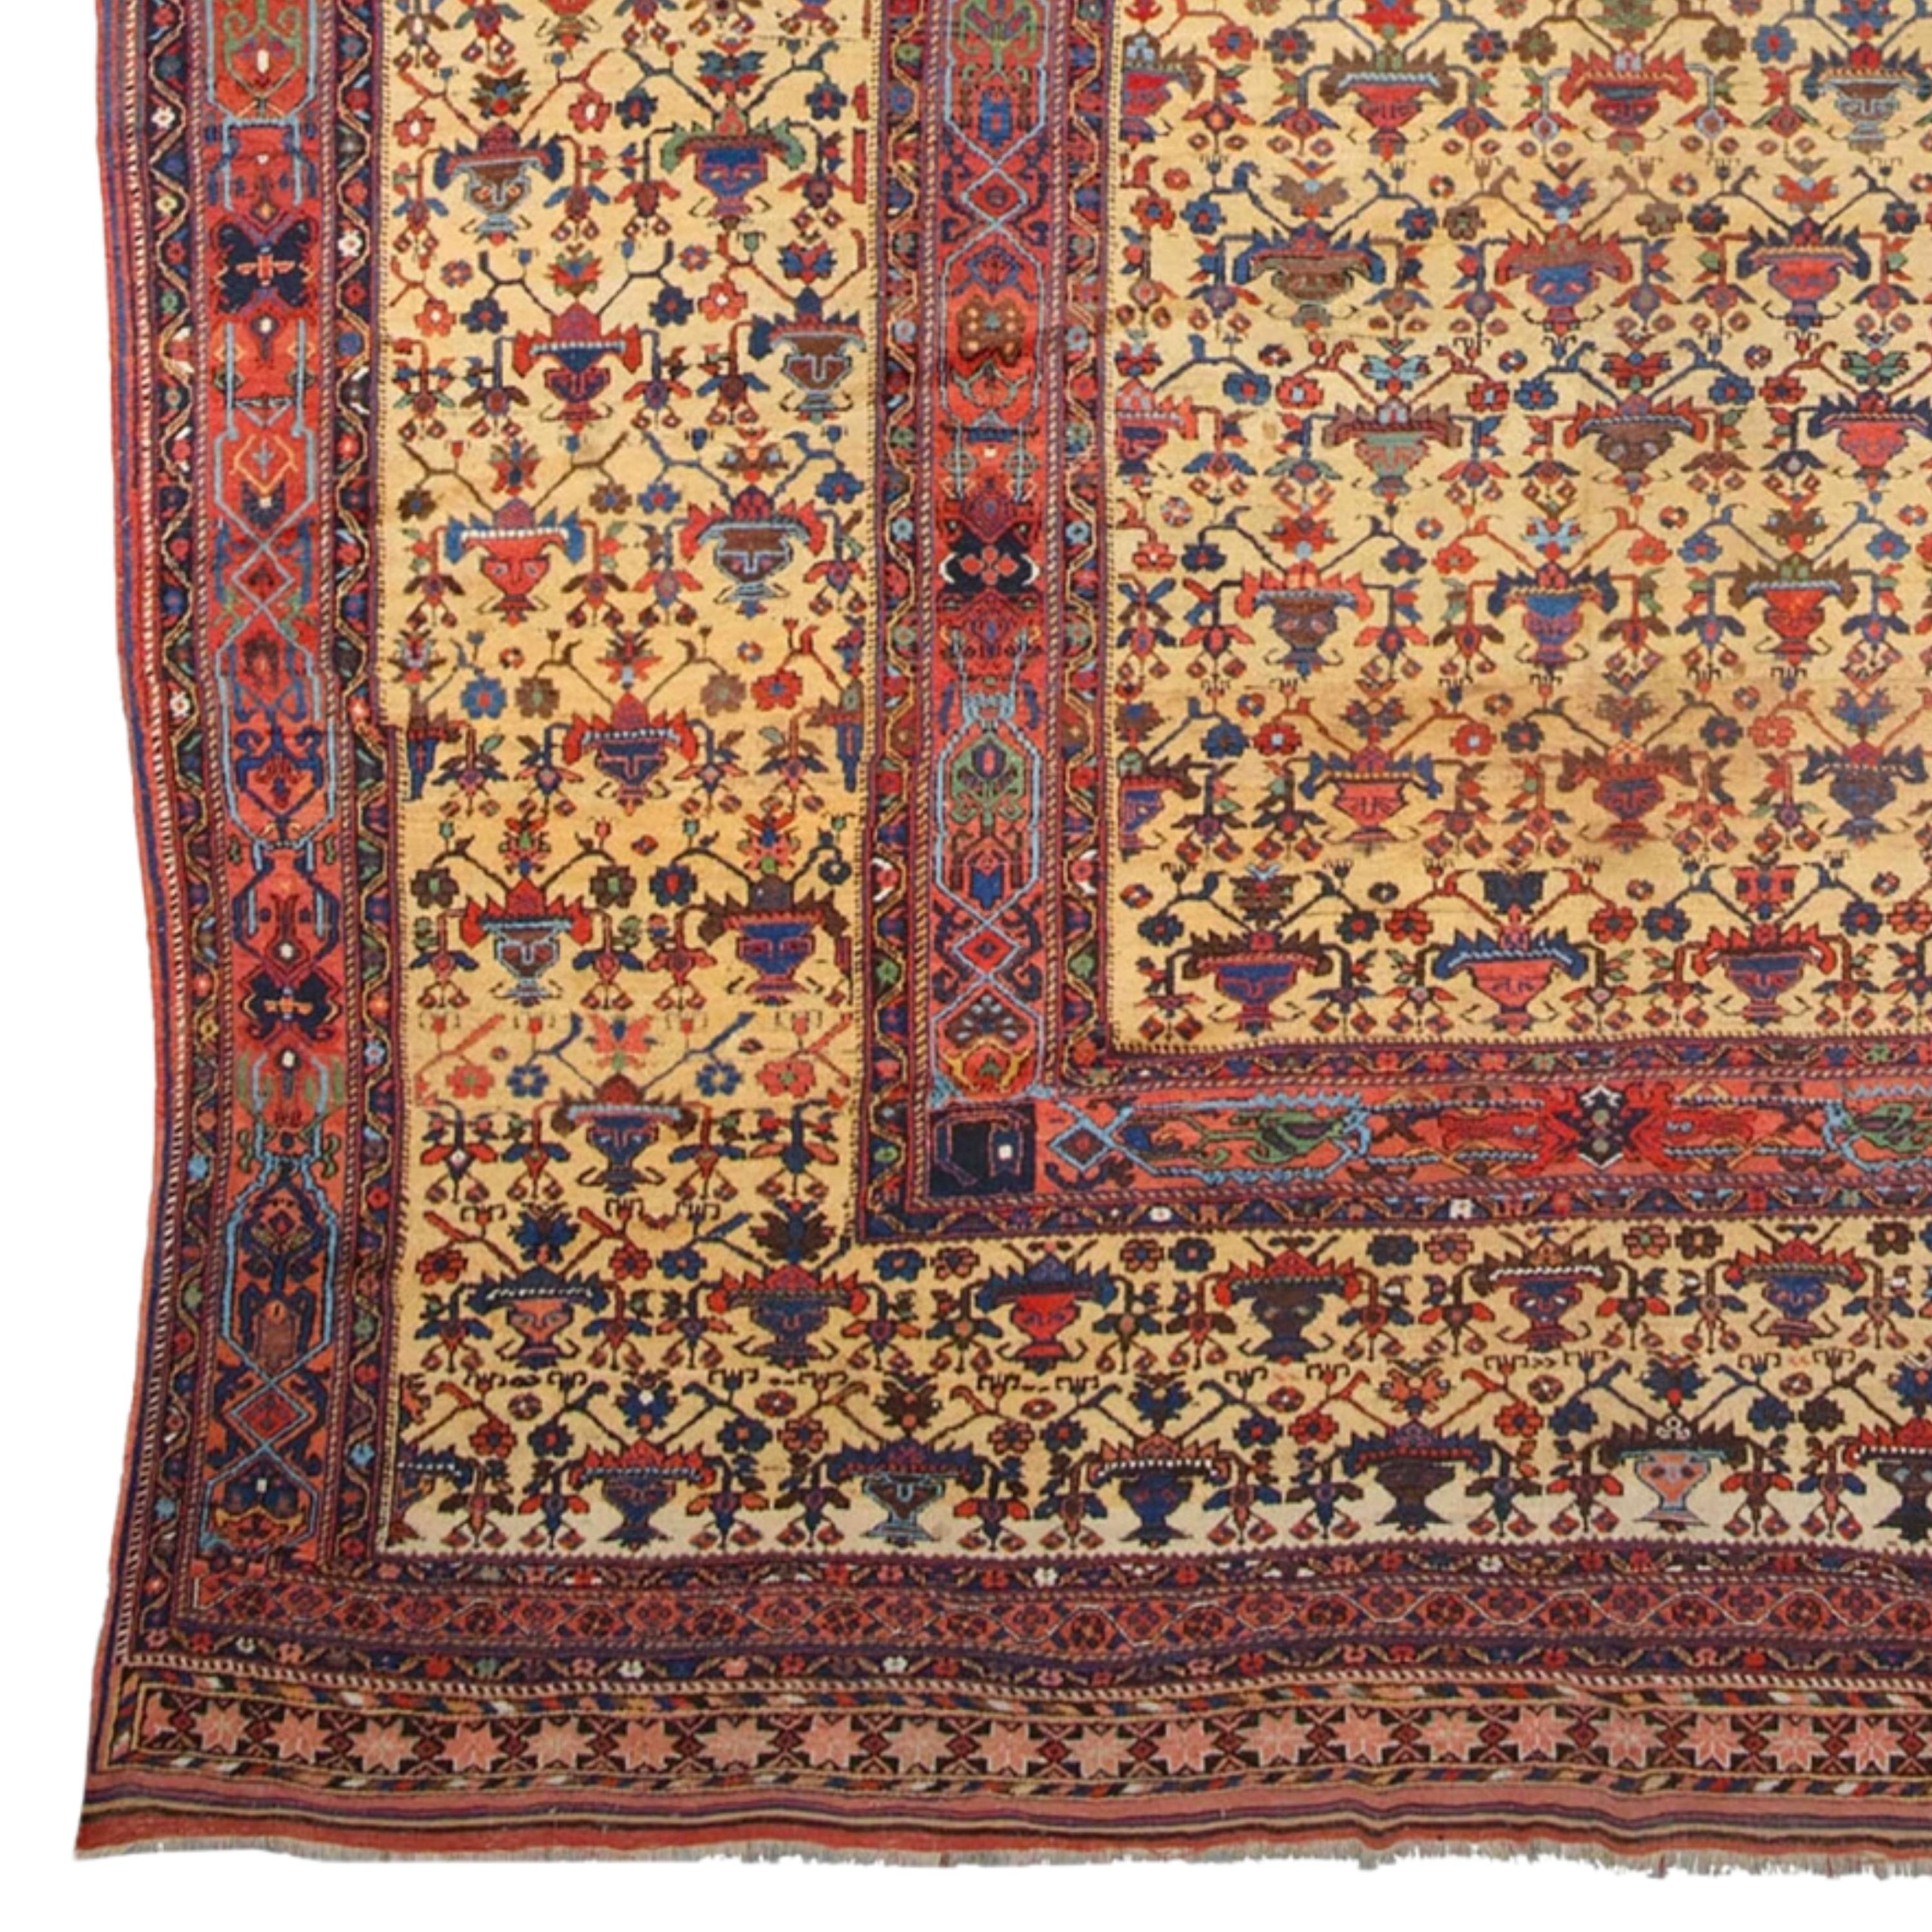 Late of the 19th Century Avshar Rug
Size: 360x650 cm

This impressive late 19th-century Avshar Carpet is a masterpiece reflecting the elegant and sophisticated craftsmanship of a historic period.

Rich Patterns: The carpet features detailed patterns